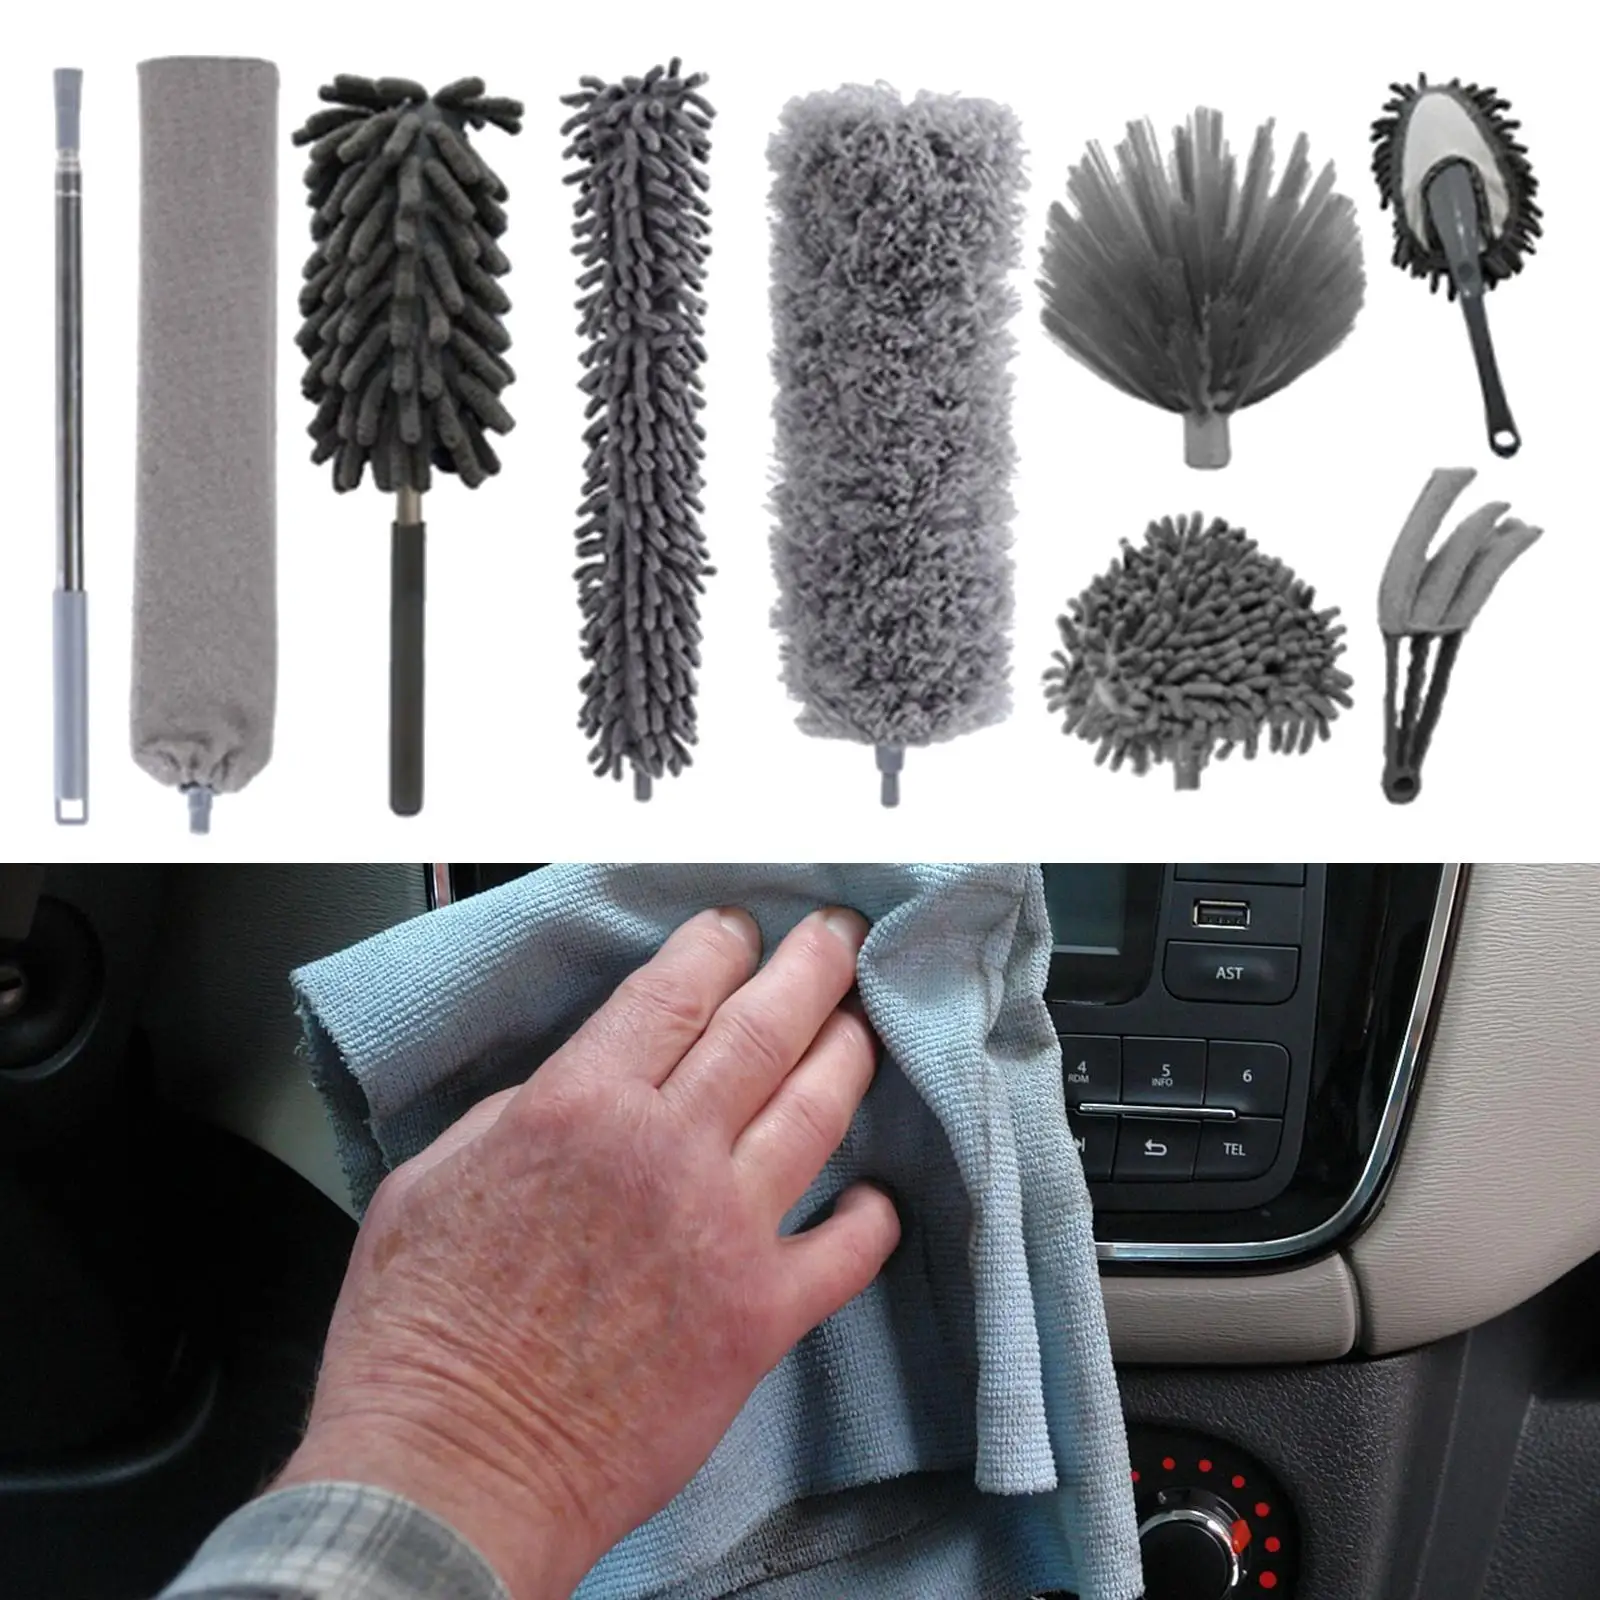 Fiber Cleaning Brush Clearance Detachable Cleaning Tool for Keyboard Office Bedroom